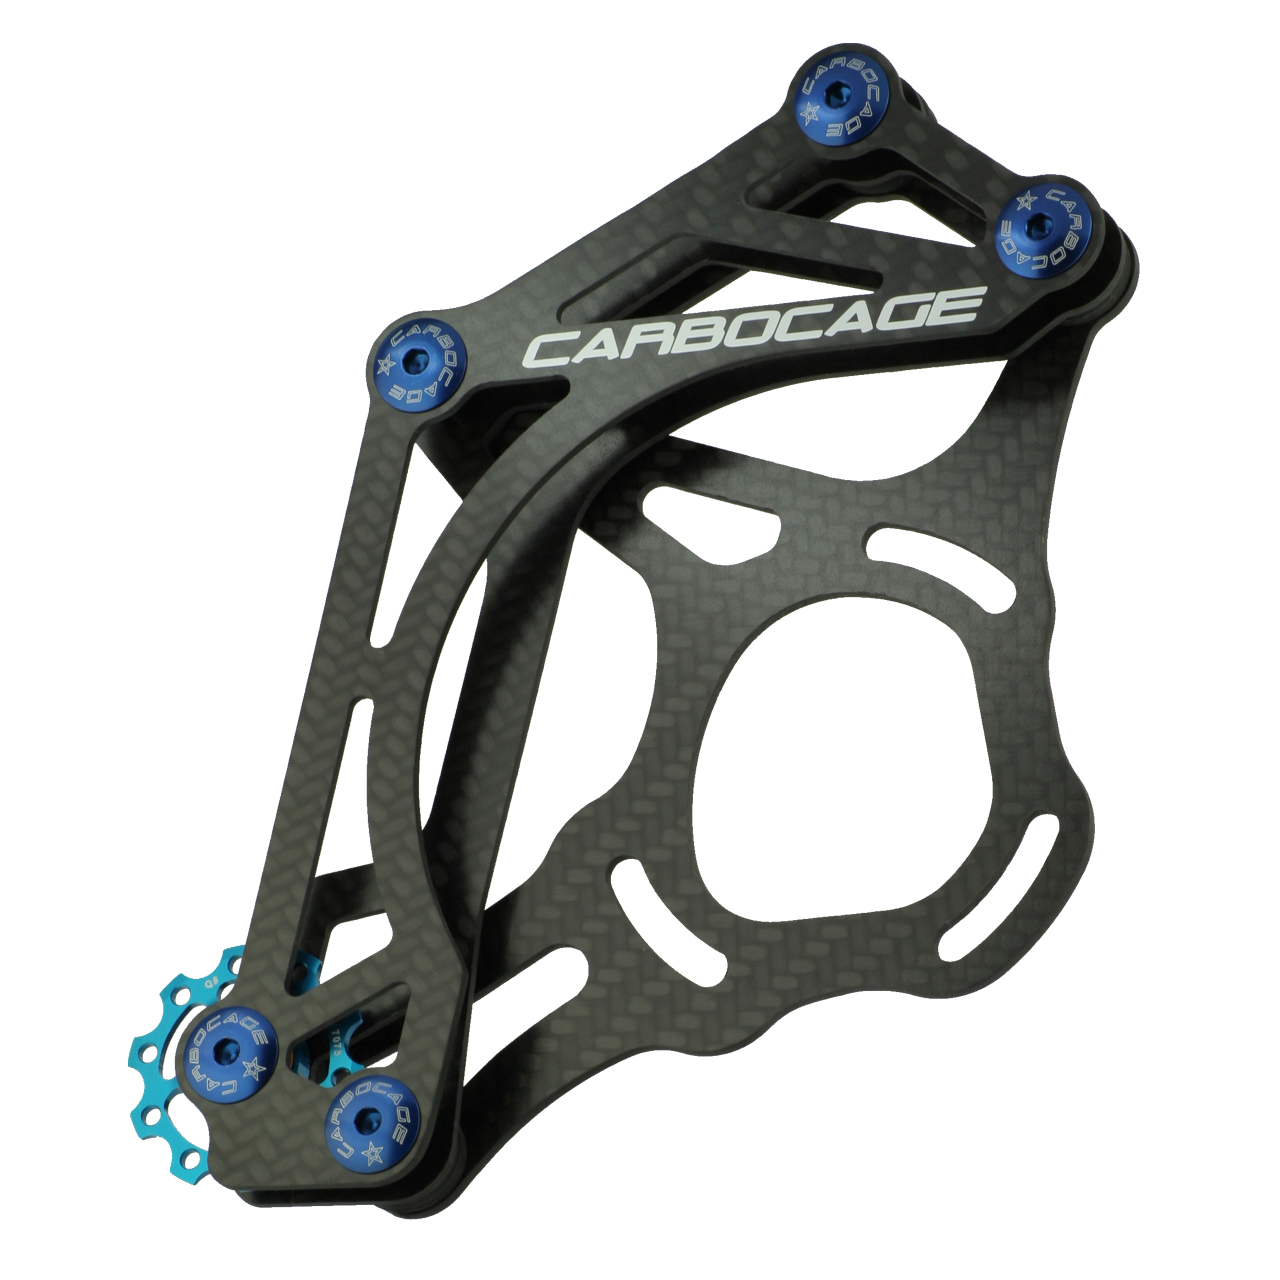 CARBOCAGE FR - Freeride chain guide carbon (CFK)